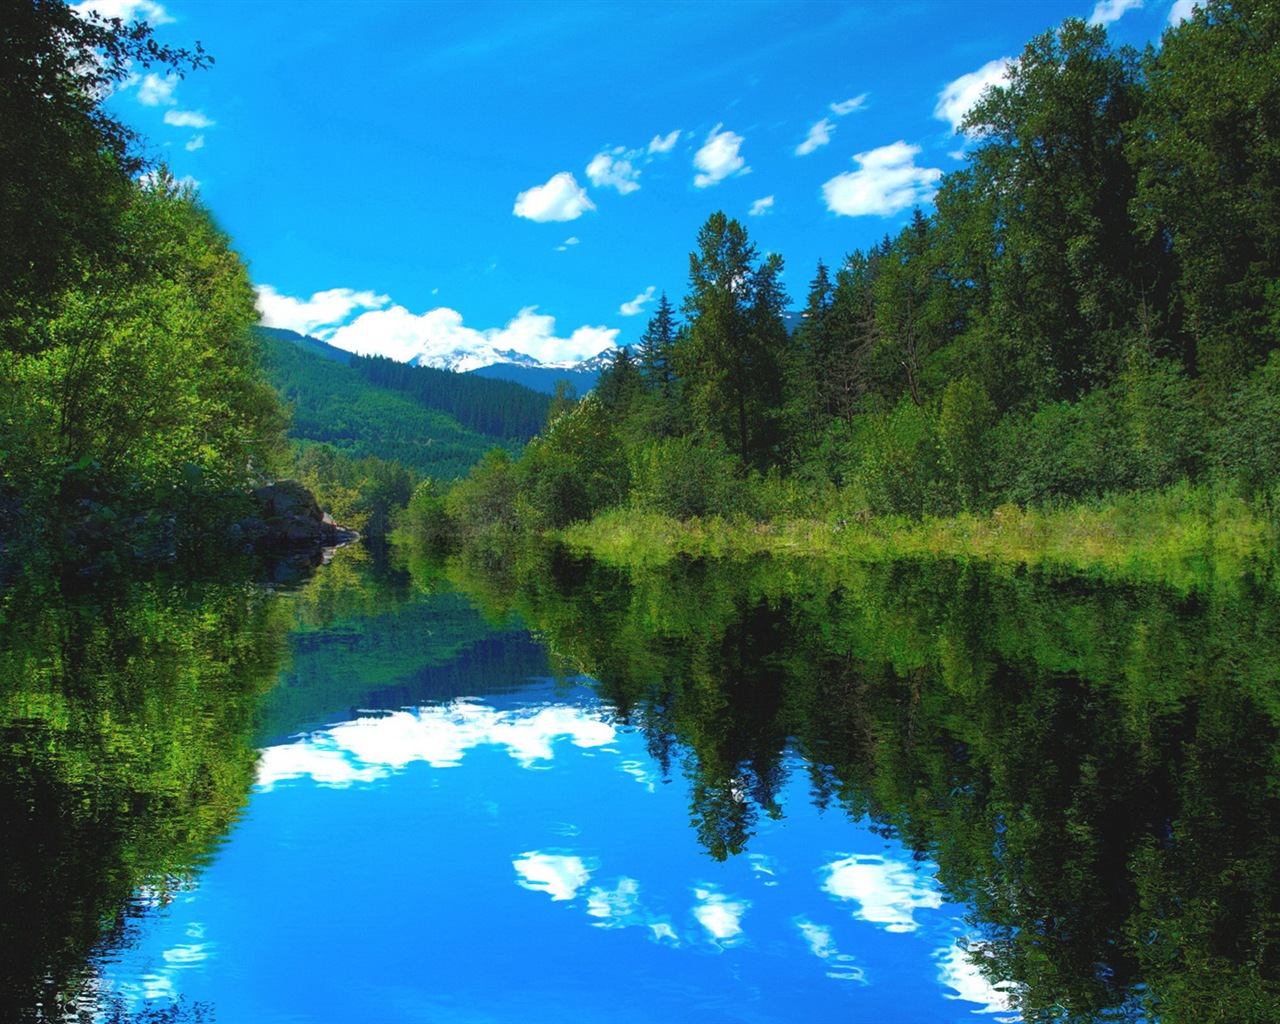 Reflection in the water natural scenery wallpaper #4 - 1280x1024